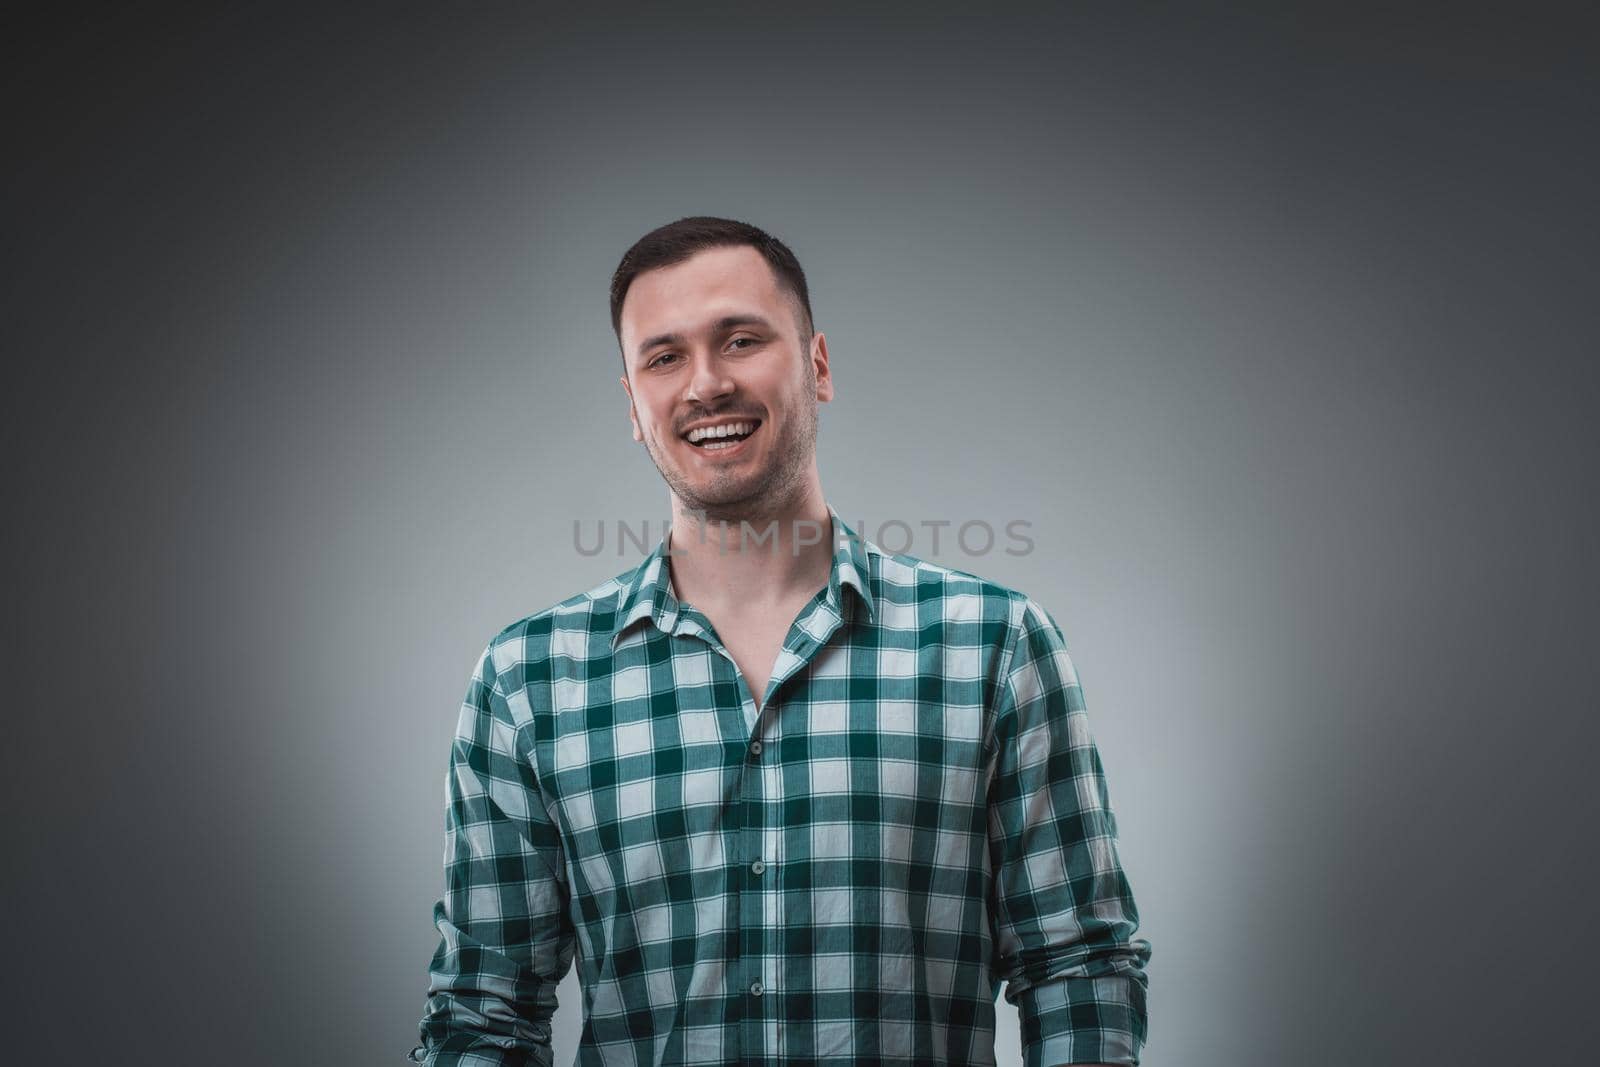 Cheerful man laughing and looking at camera with a big grin. Portrait of a happy young man standing over grey background.